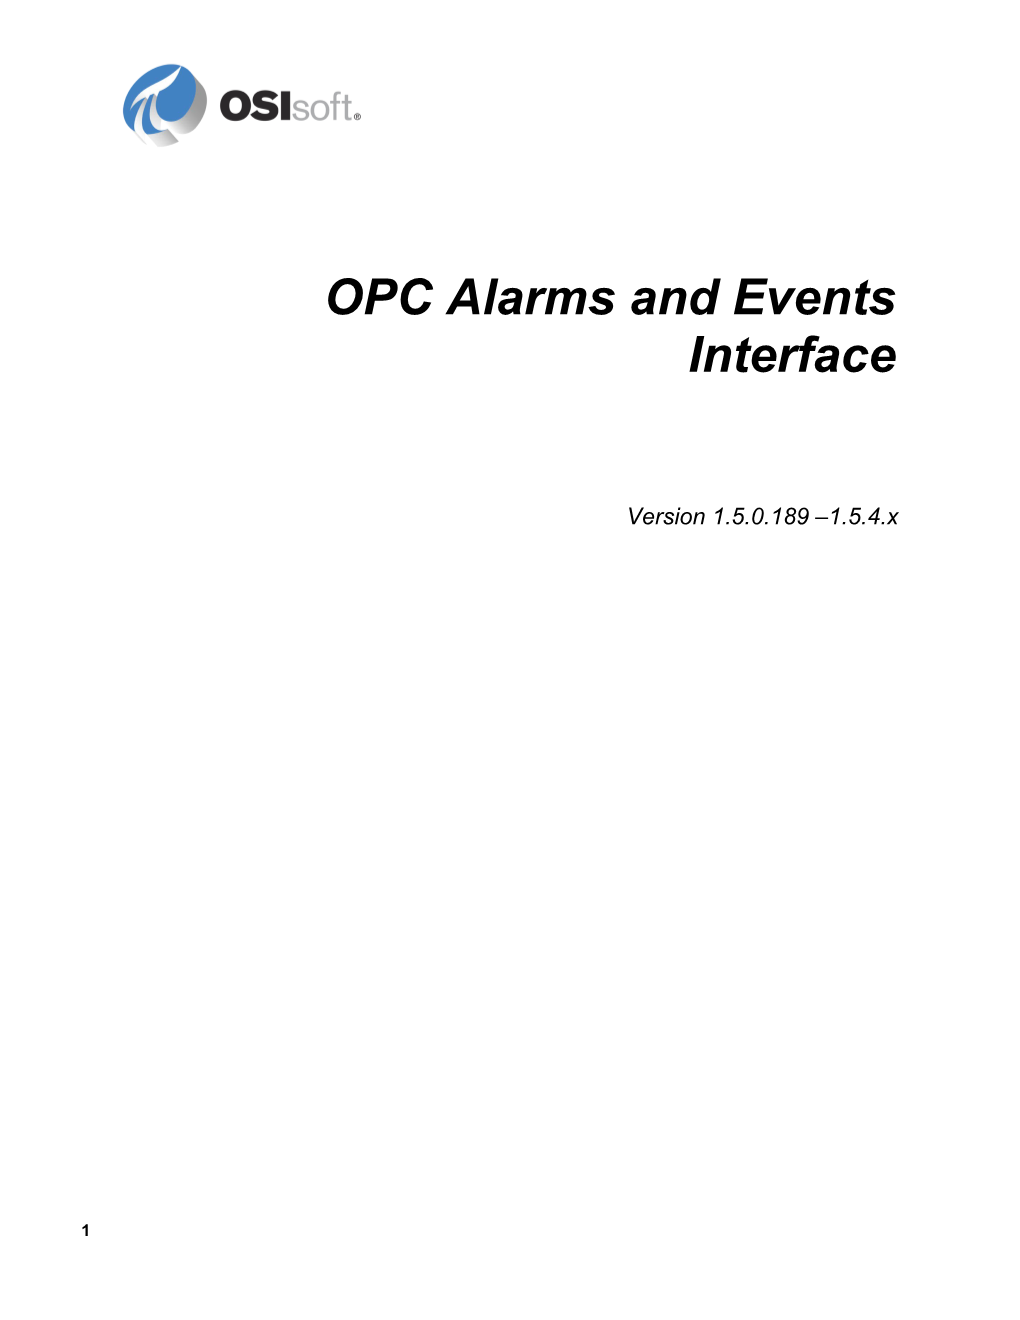 OPC Alarms and Events Interface